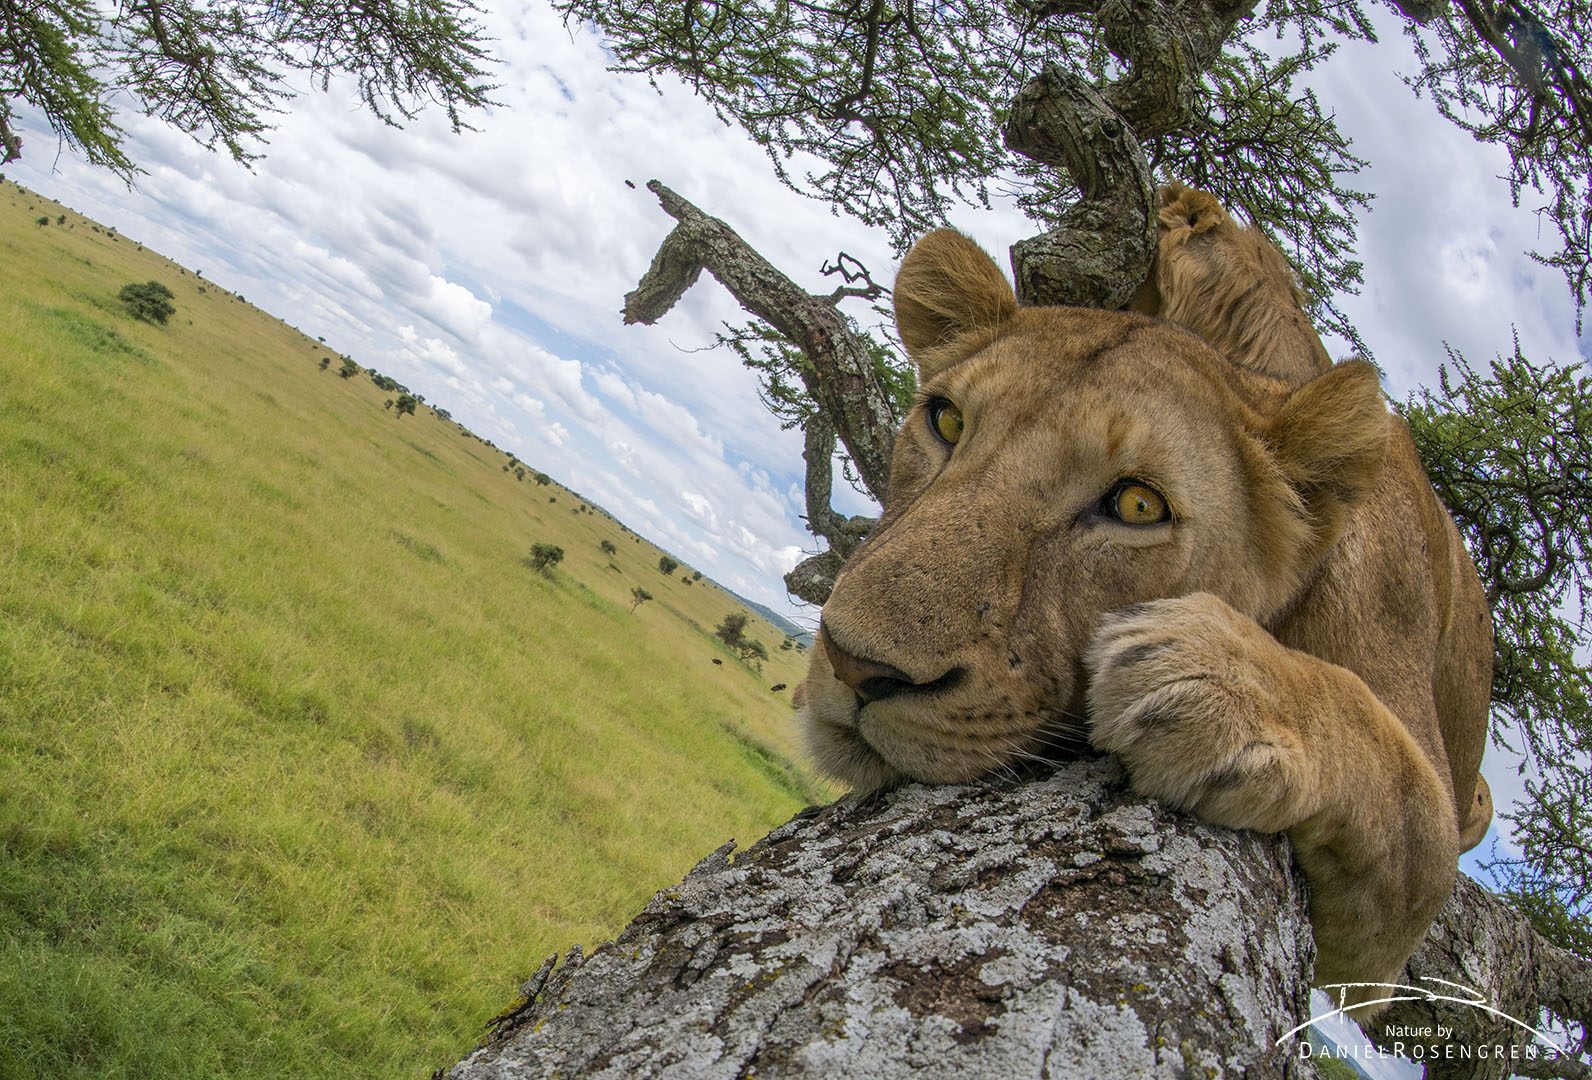 It might appear as if I was lying next to the lion in the tree to get this shot, I'm not. © Daniel Rosengren